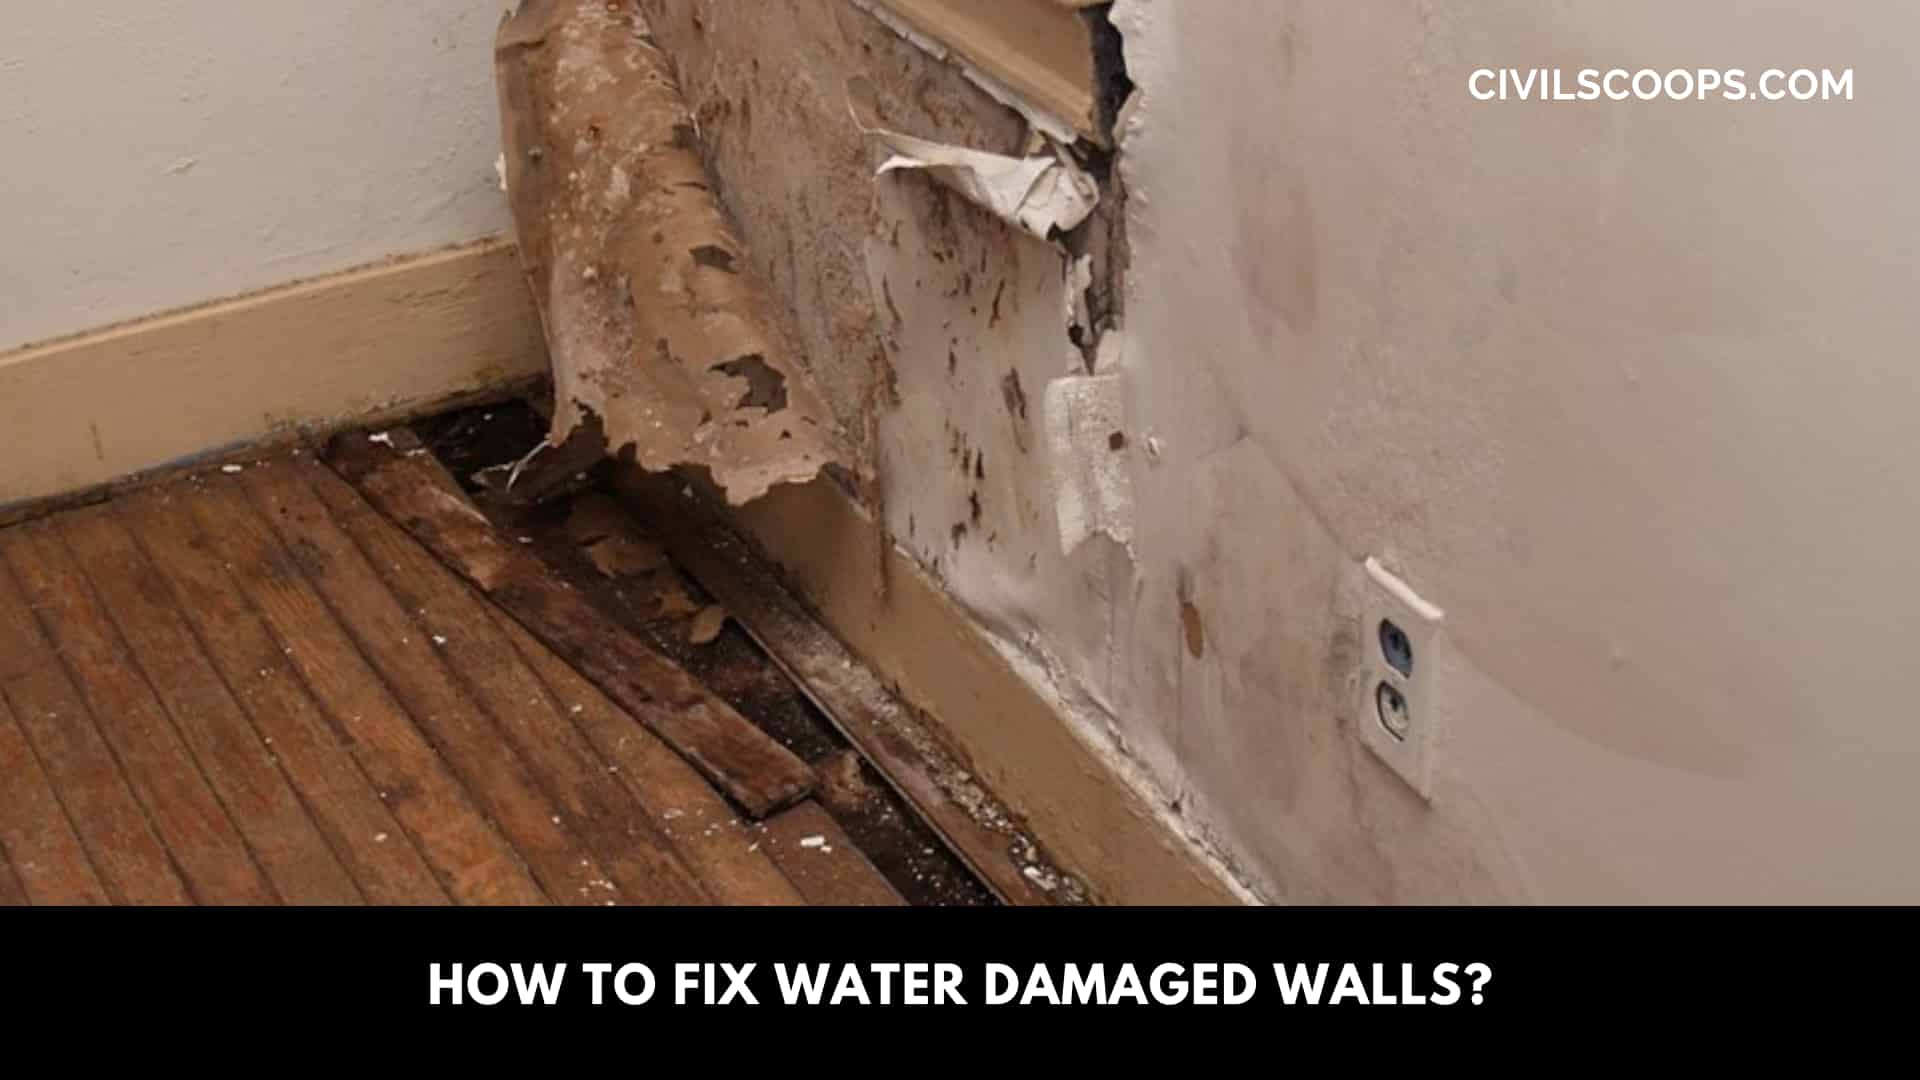 How to Fix Water Damaged Walls?